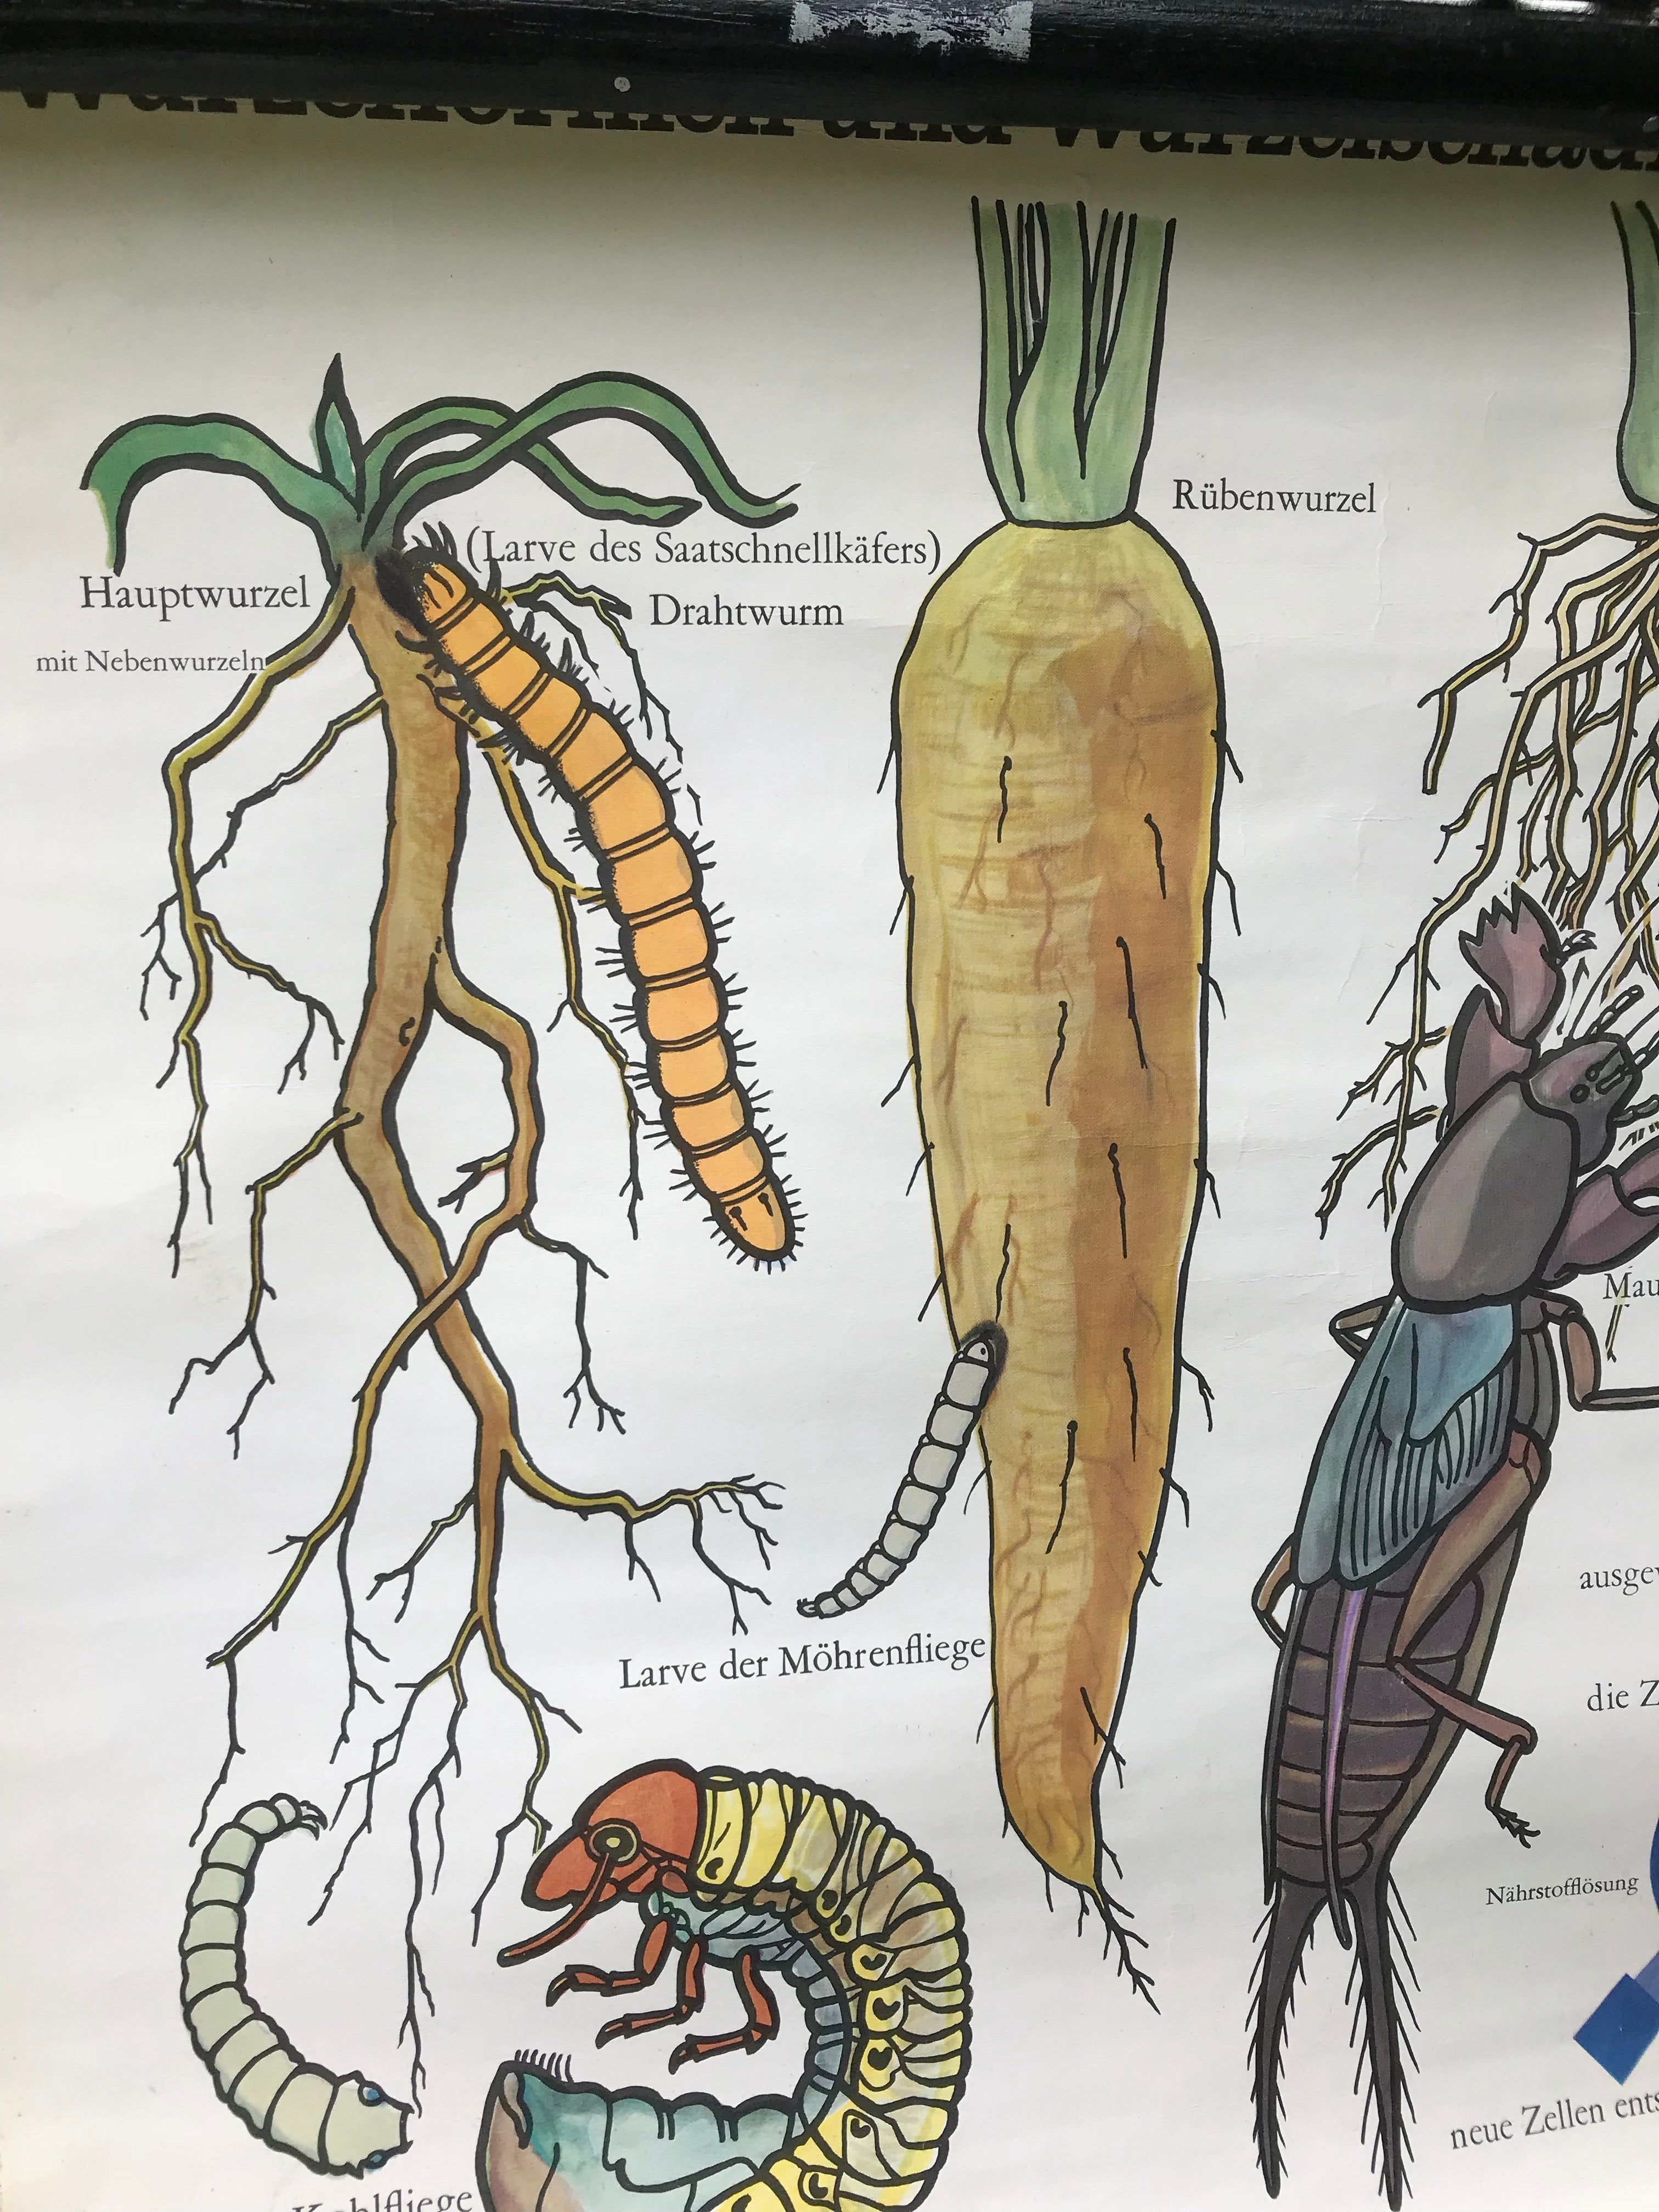 Vintage Botanical School Chart of Root Vegetables and Pests